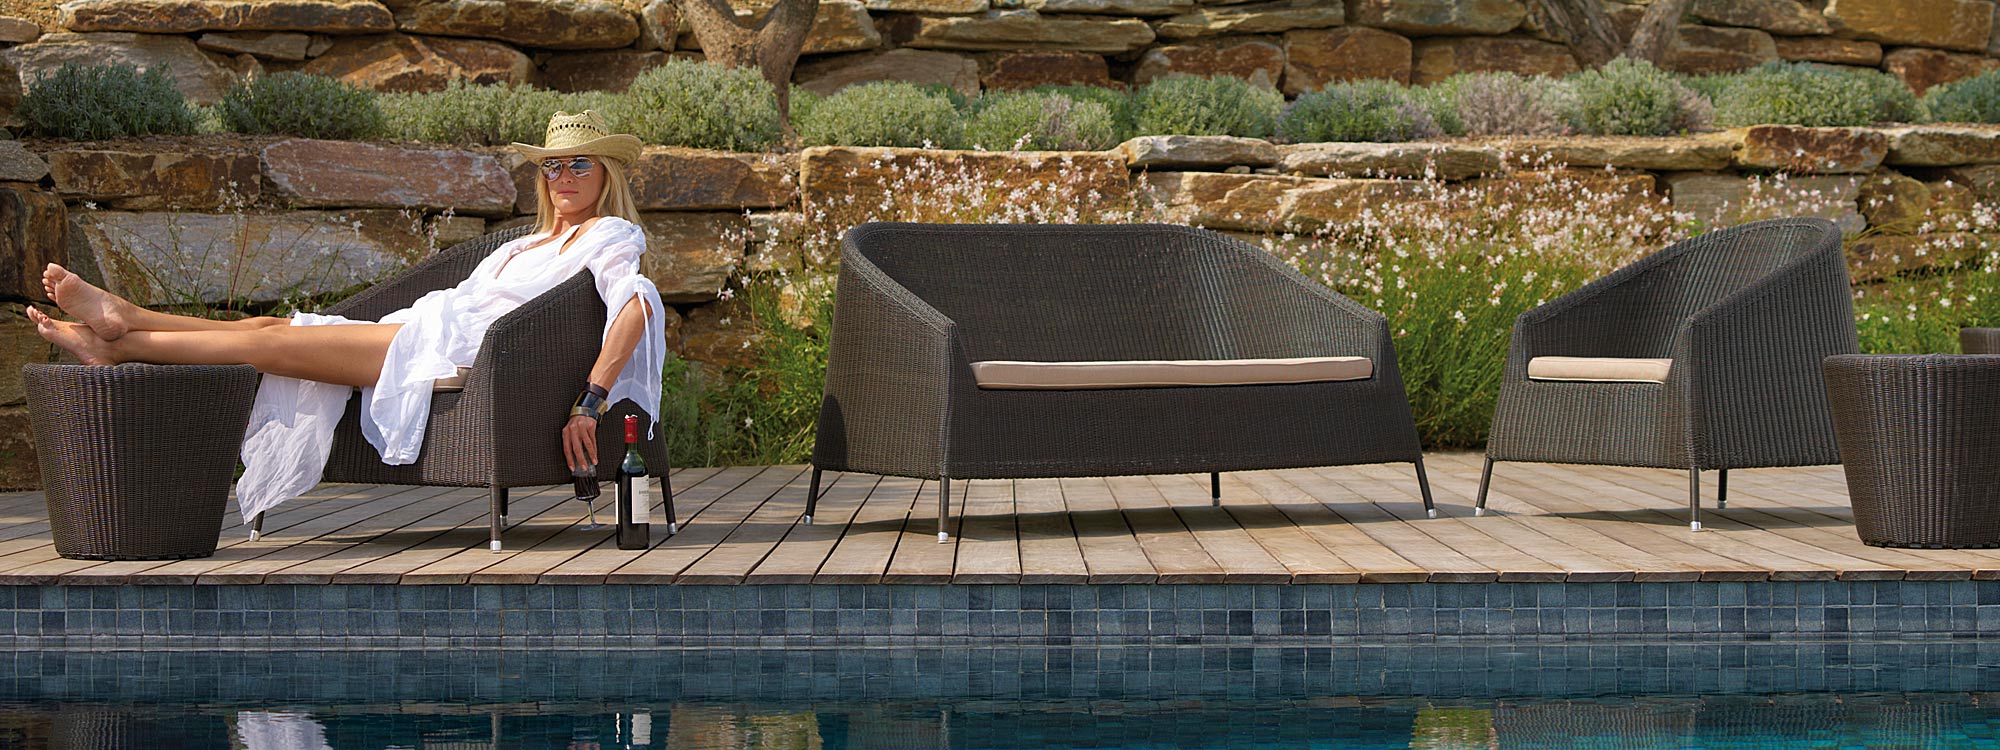 Kingston all-weather wicker lounge furniture includes a modern outdoor rattan sofa & lounge chairs by Cane-line luxury garden furniture.